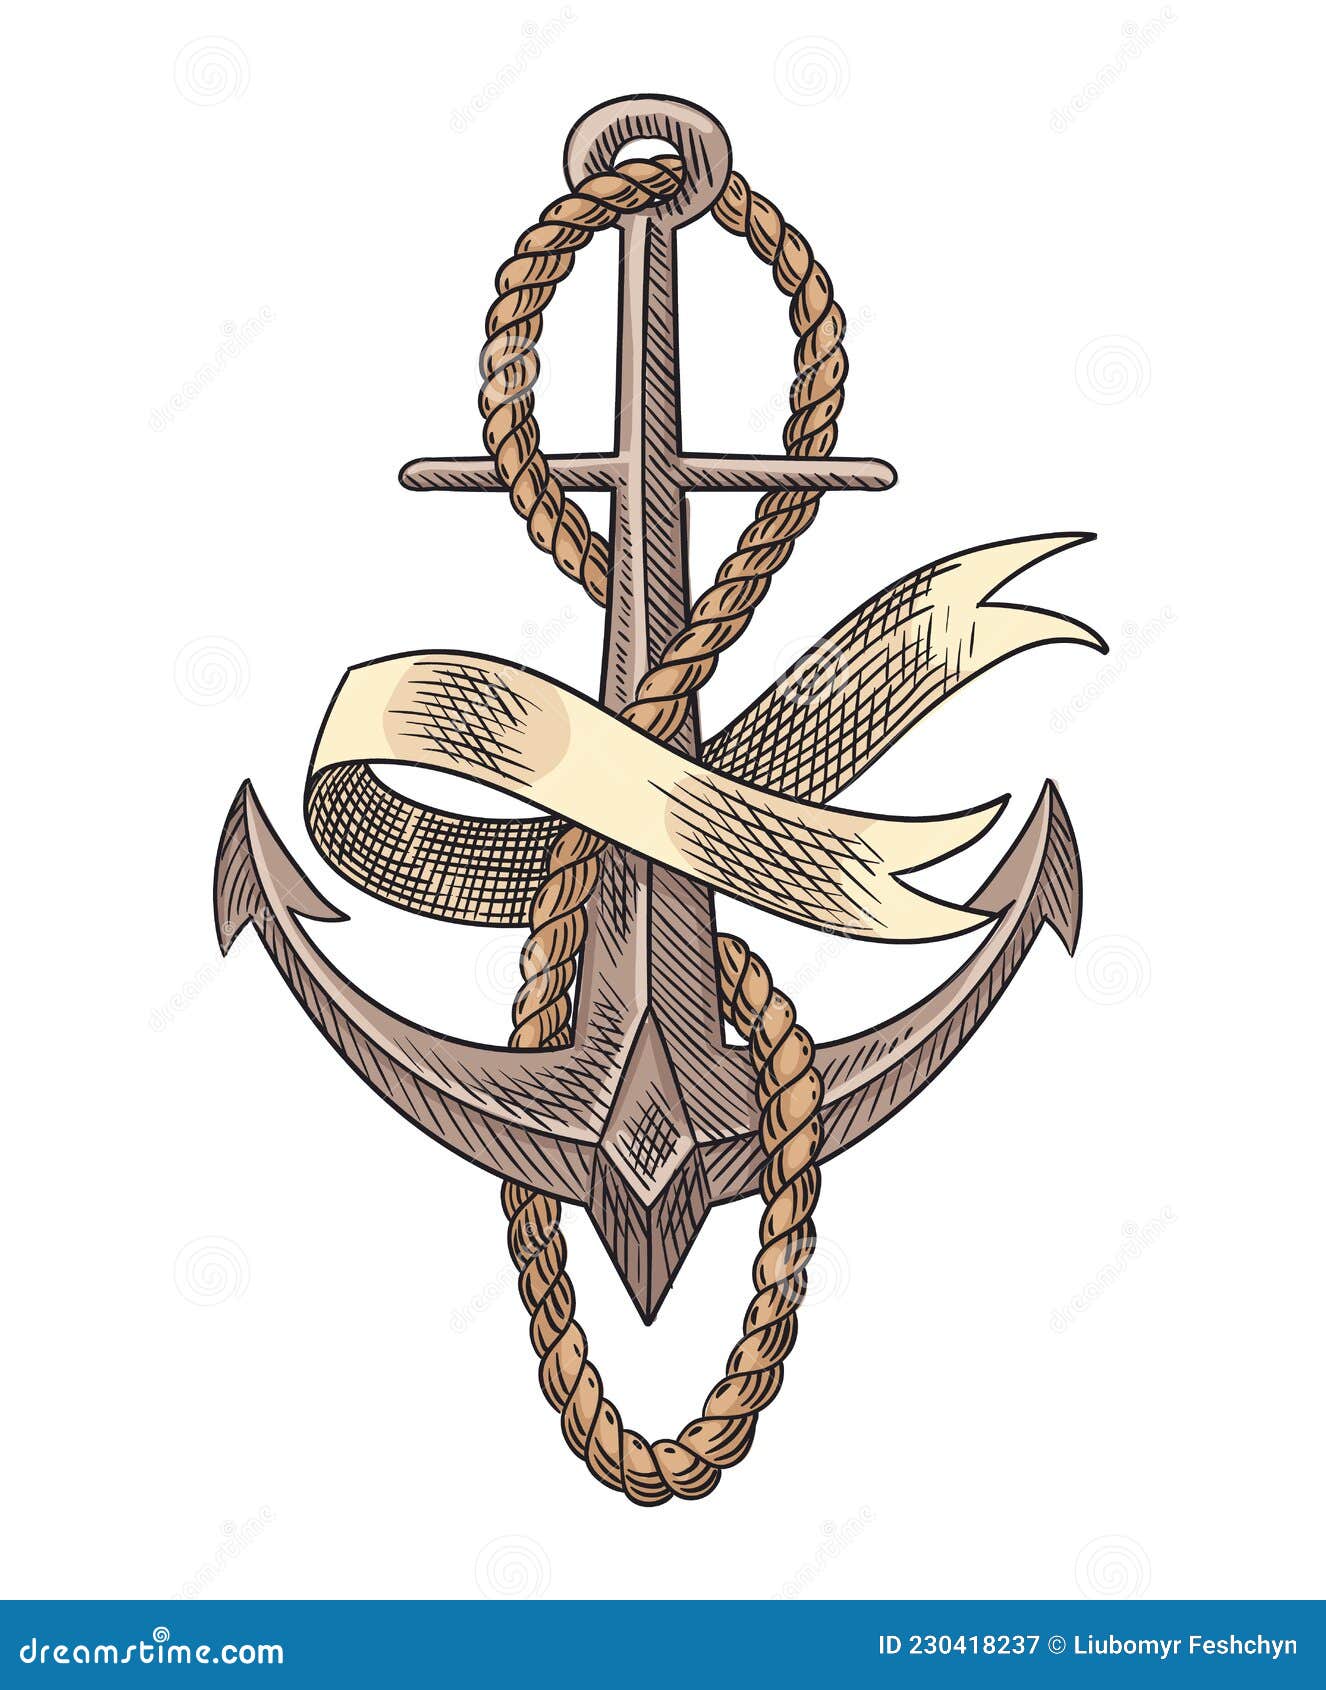 Anchor and Rope Sketch Engraving Vector Illustration. Hand Drawn Print ...